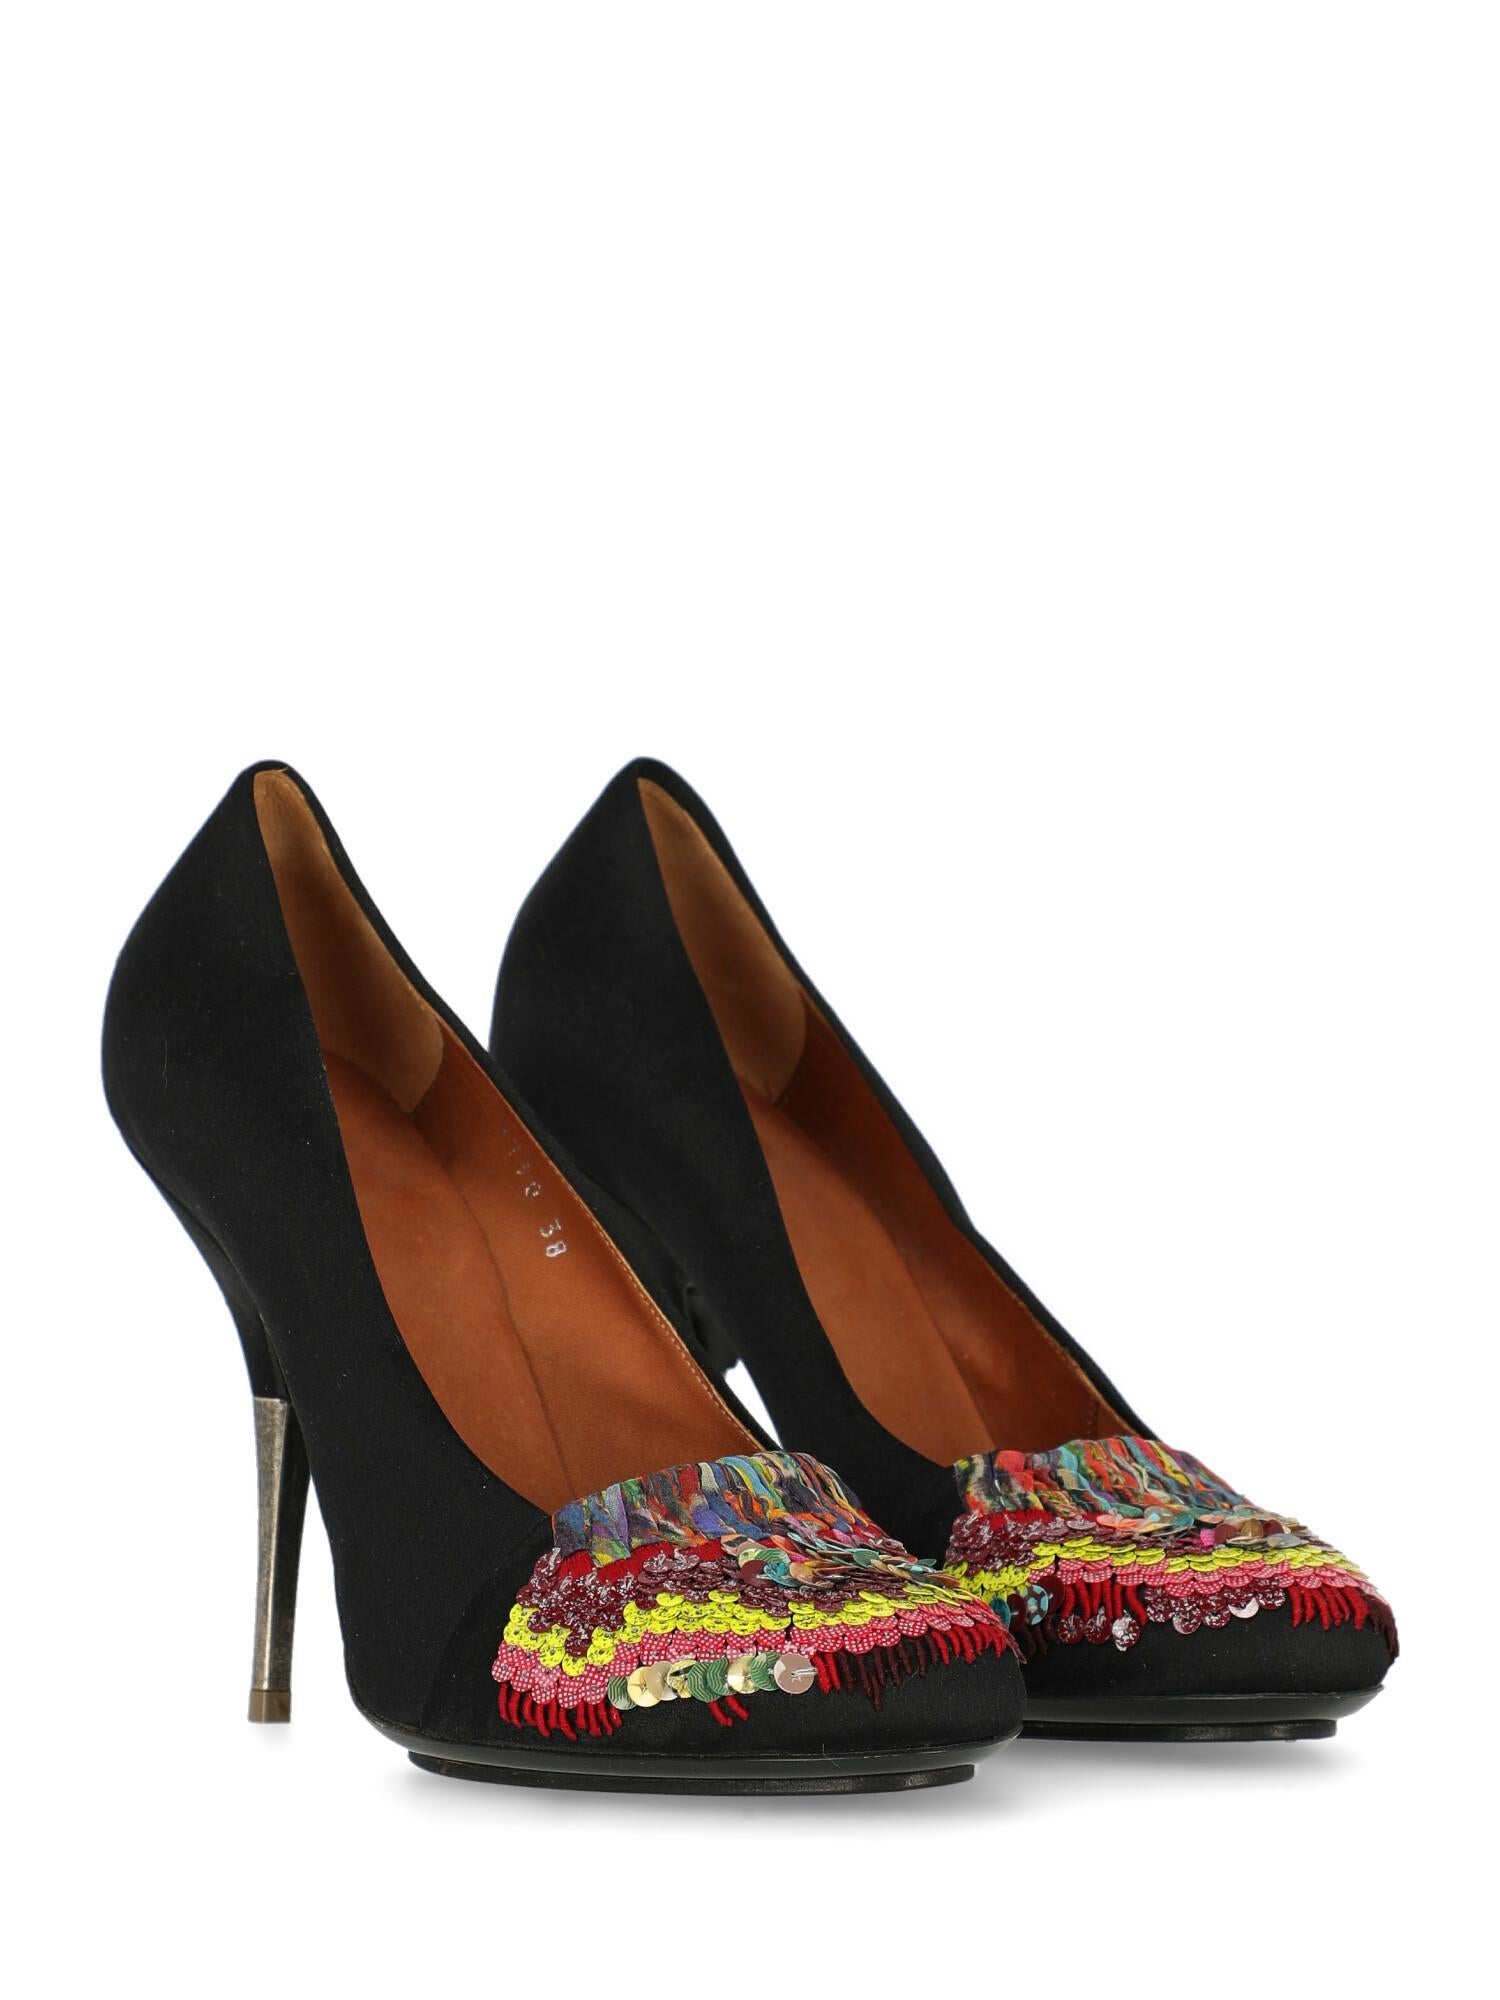 Shoe, fabric, other patterns, round toe, branded insole, tapered heel, high heel, sequin embellishment
Includes:	 N\A
-Product Condition: Very Good
Upper: loose stitchings, negligible wrinkle. Insole: negligible generic residues.

Measurements: